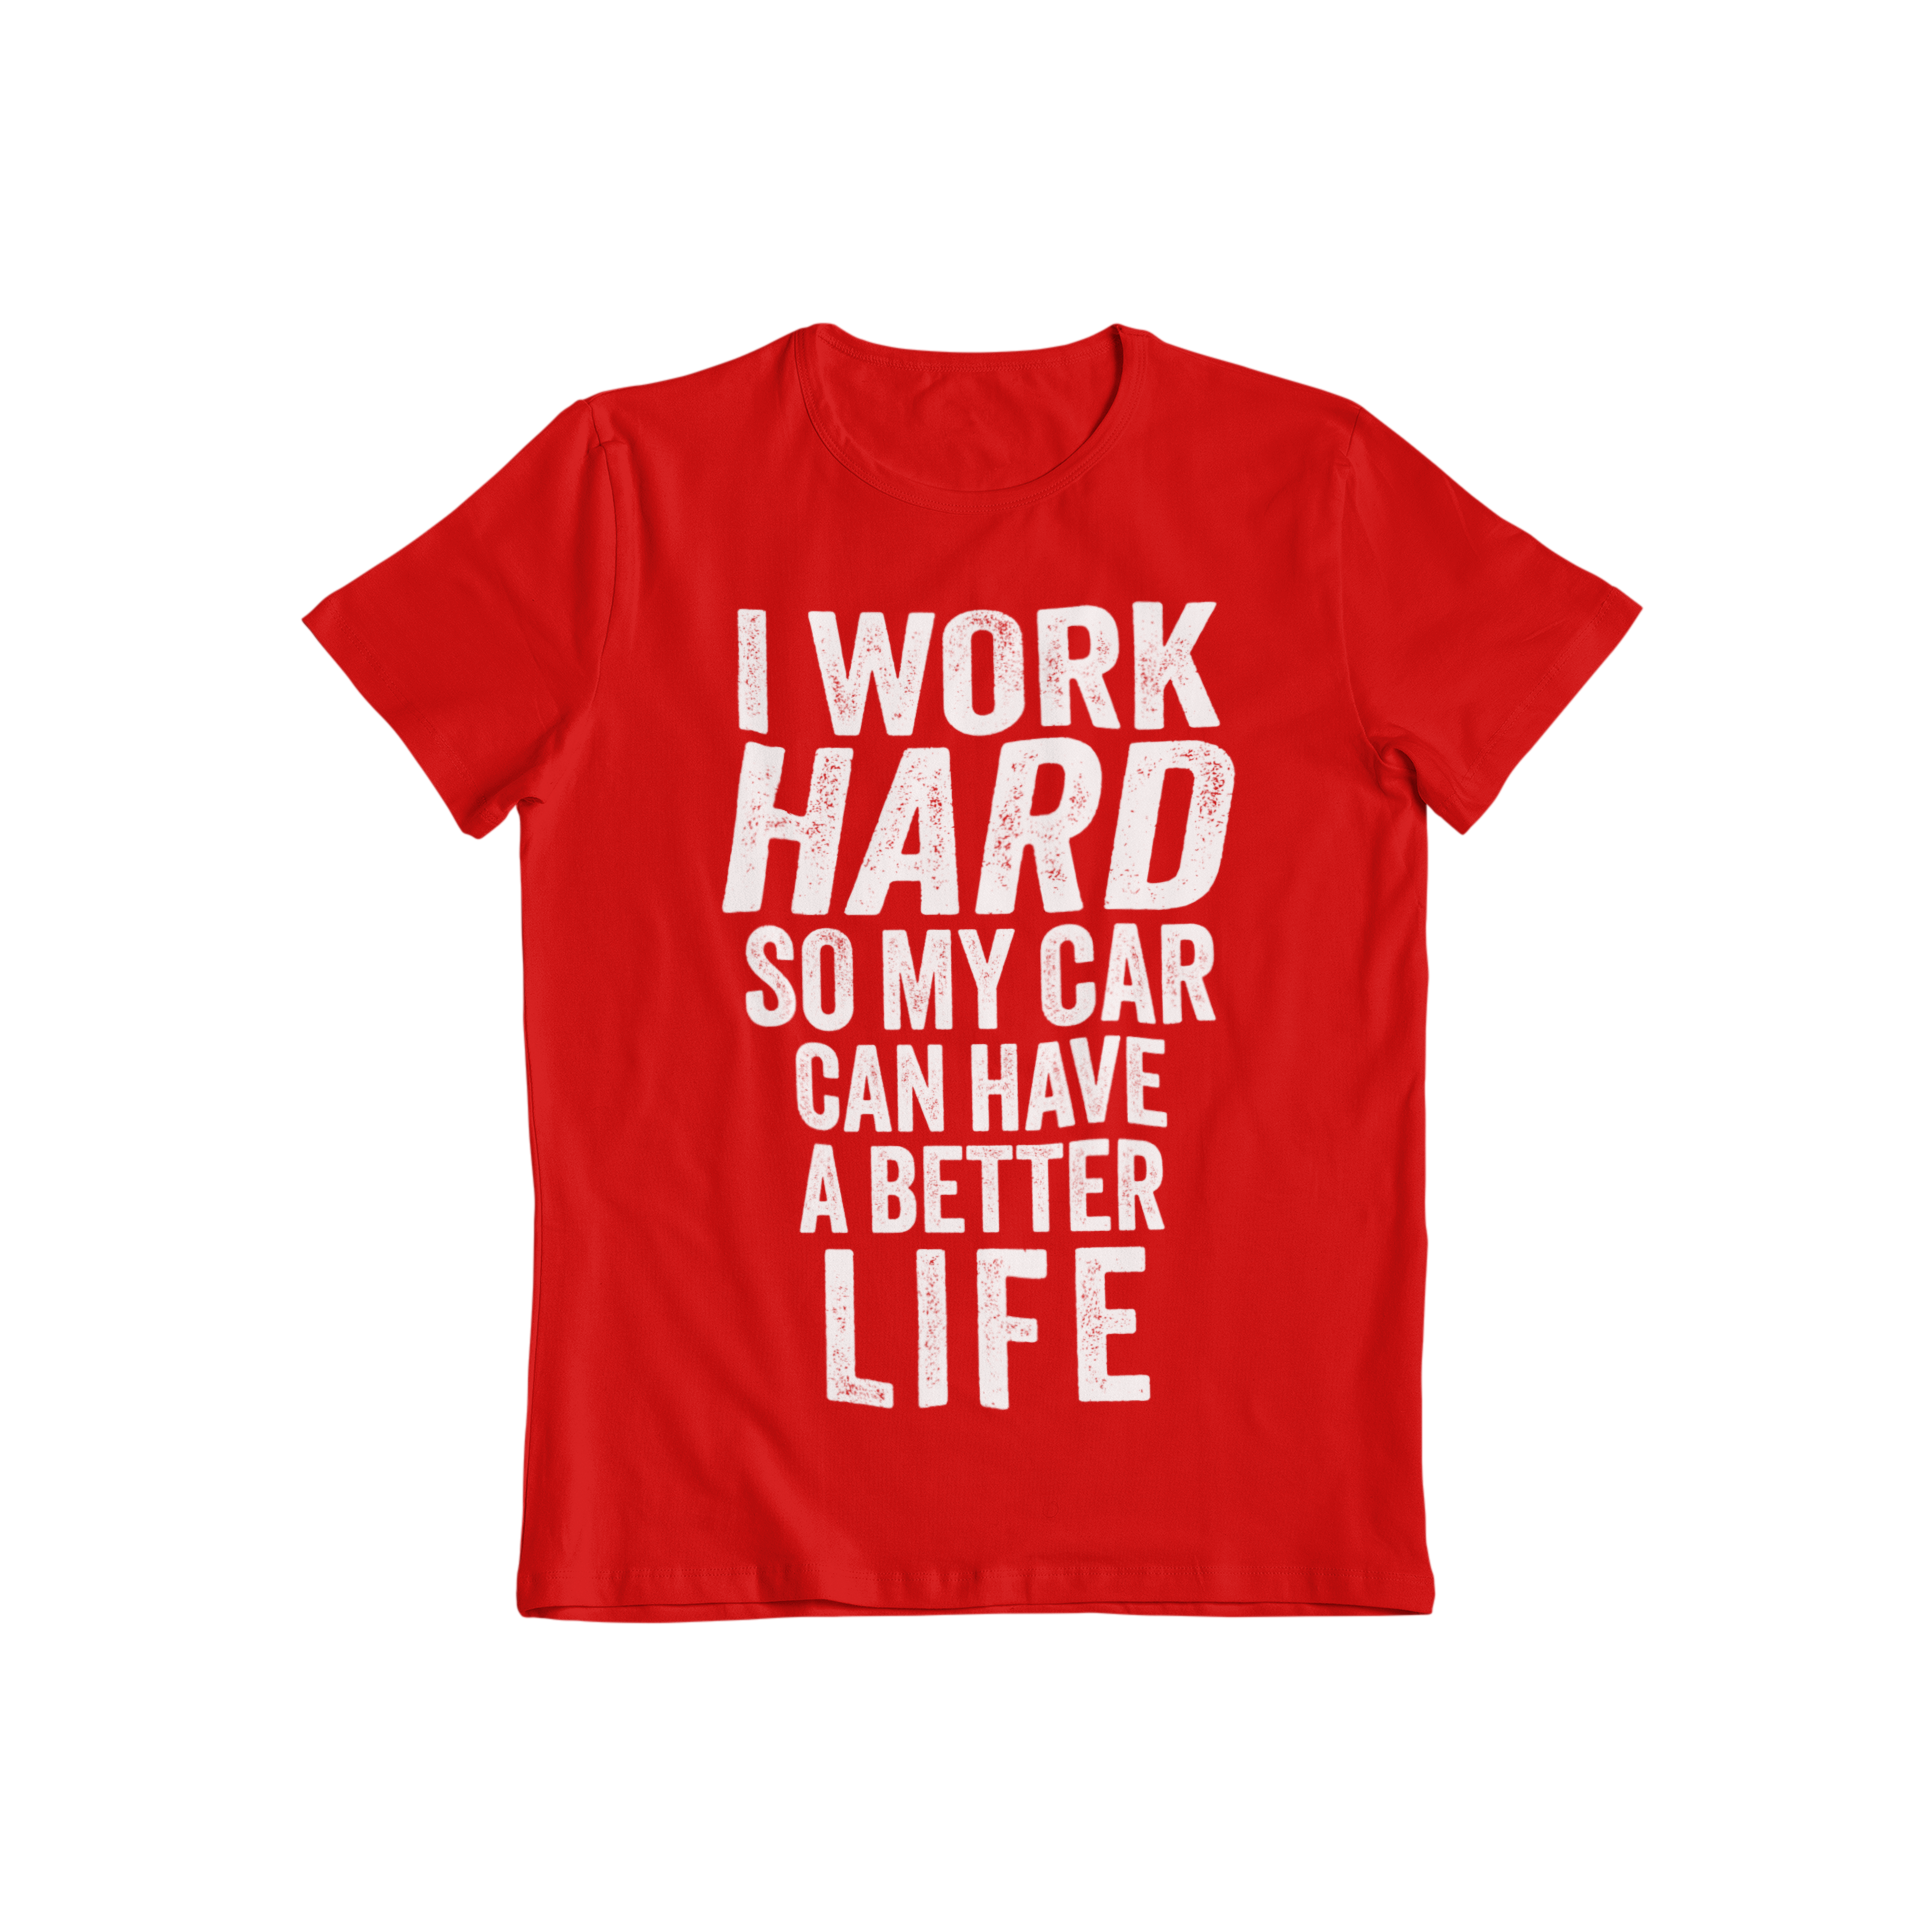 This classic slogan t-shirt won't let you forget why you work so hard. With the playful message "I work hard so my car can have a better life", it's a fun way to show off your work ethic. Plus, your car will thank you (maybe).